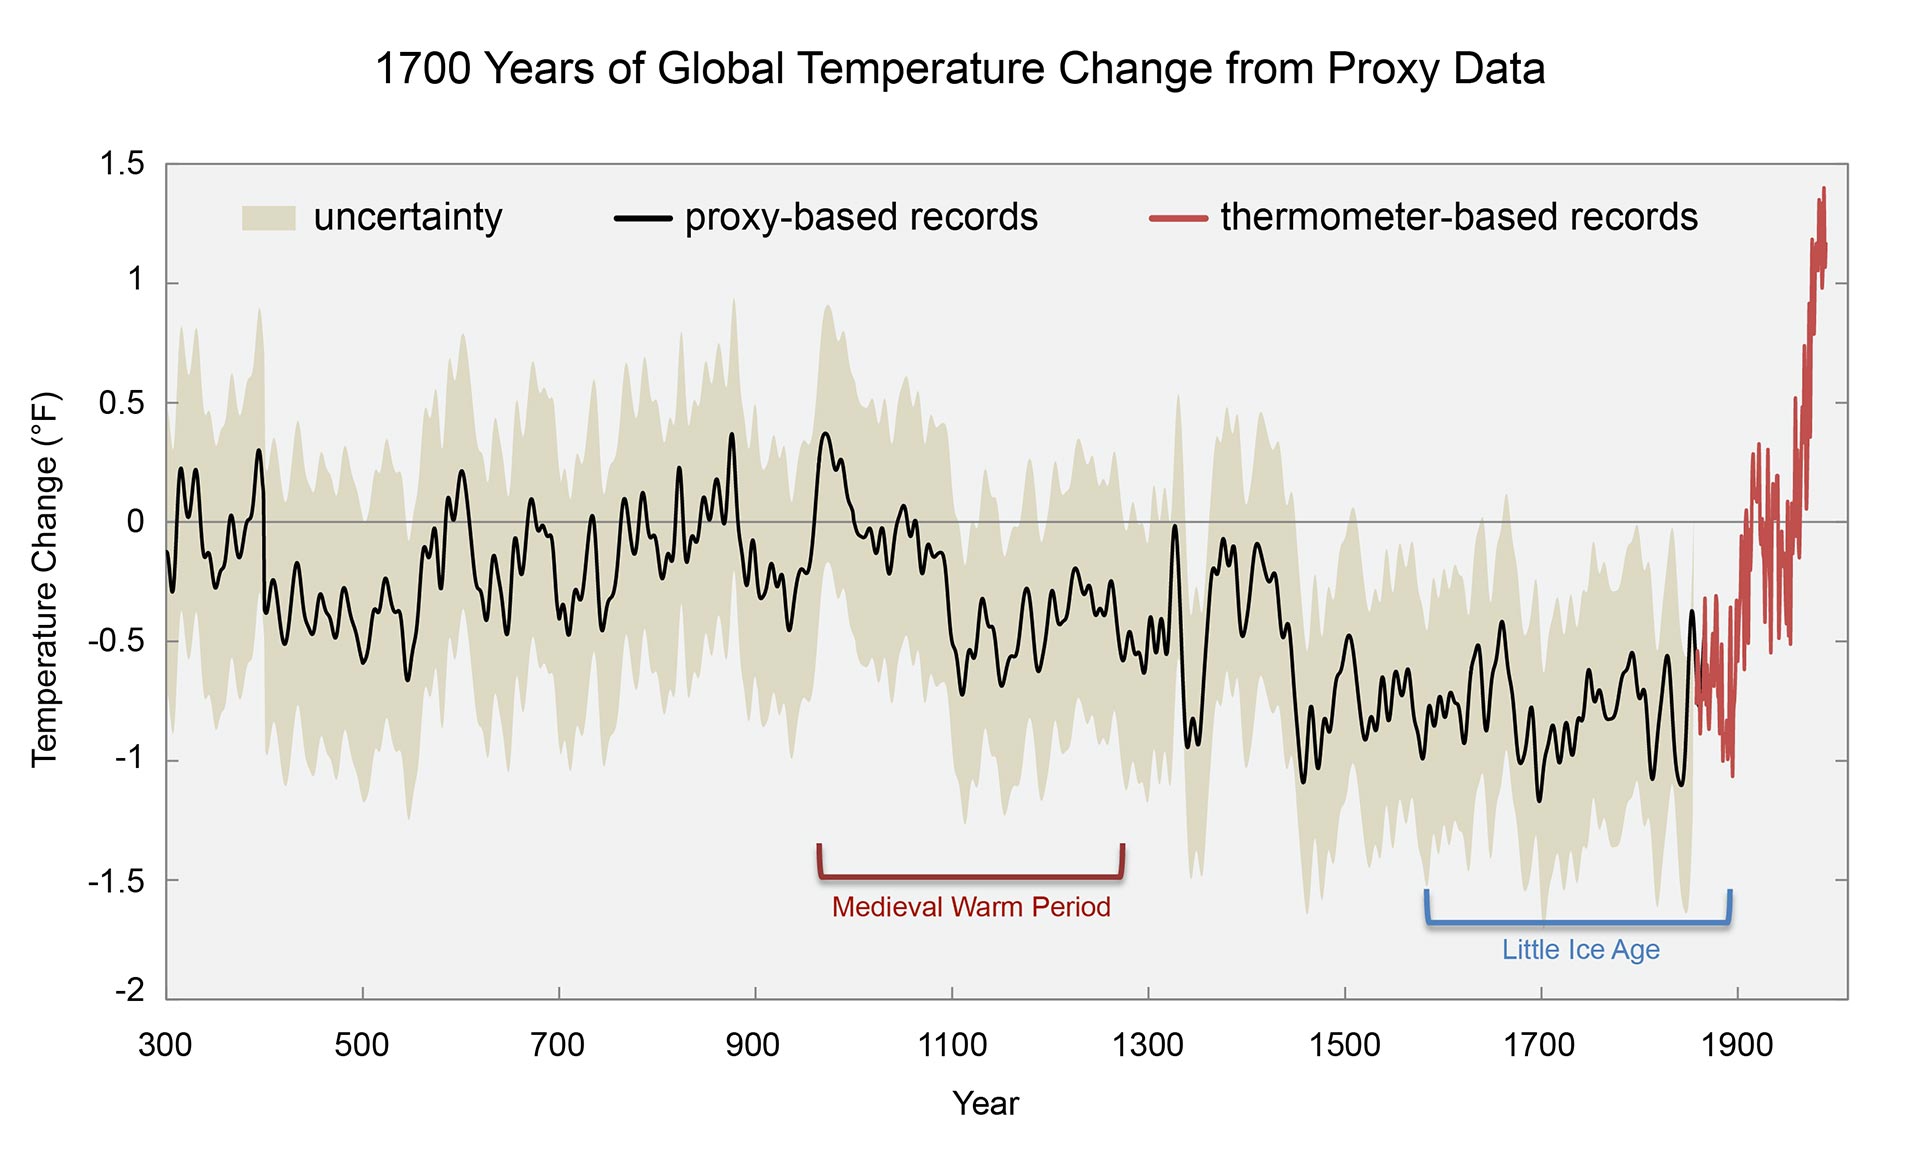 global map of temperature trends from 1900-2014